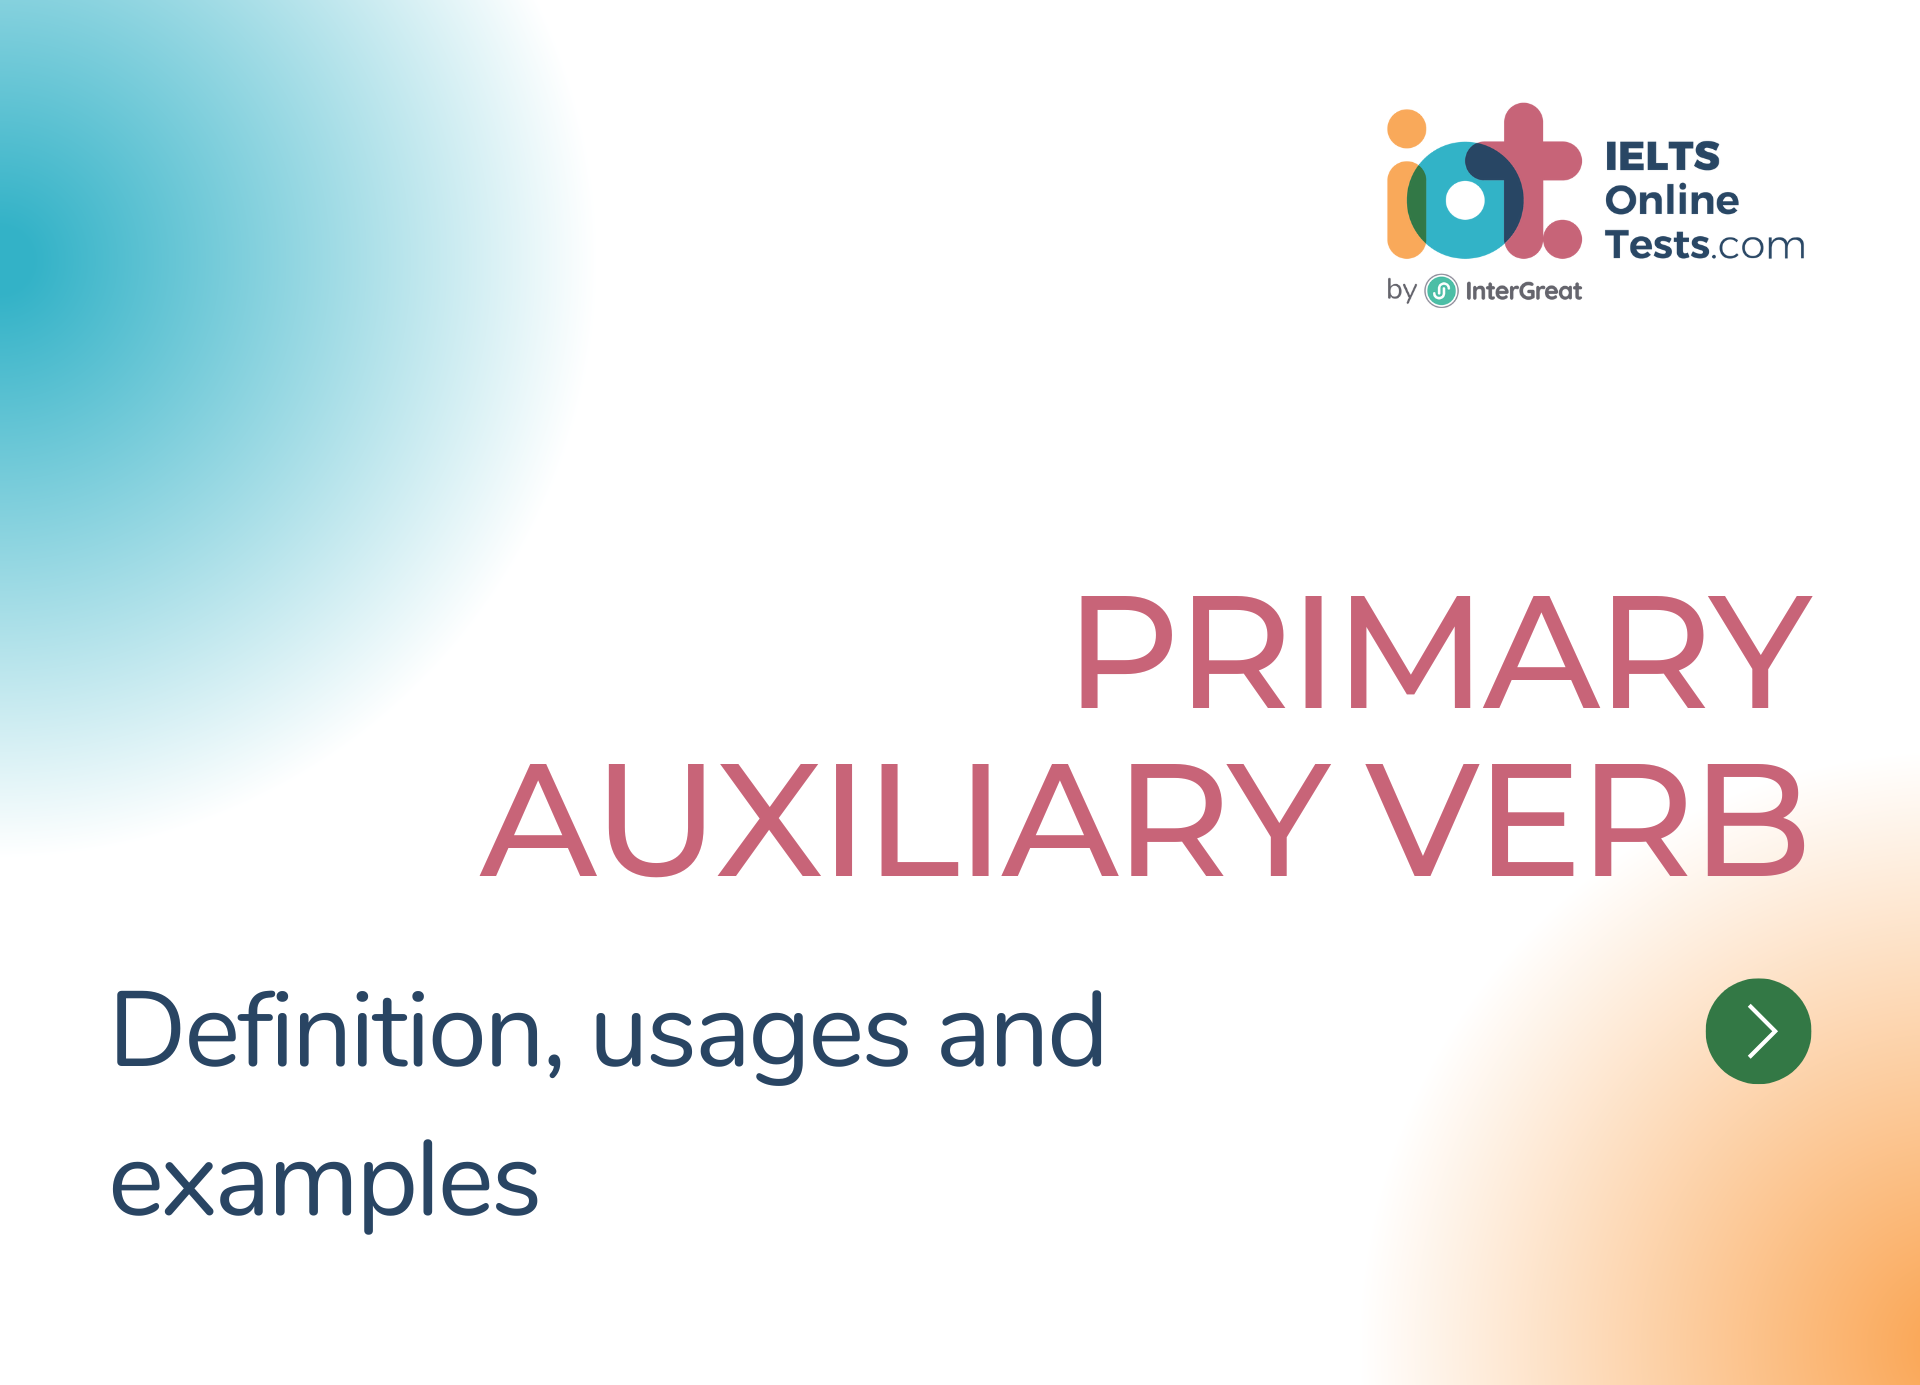 Primary auxiliary verb definition and examples